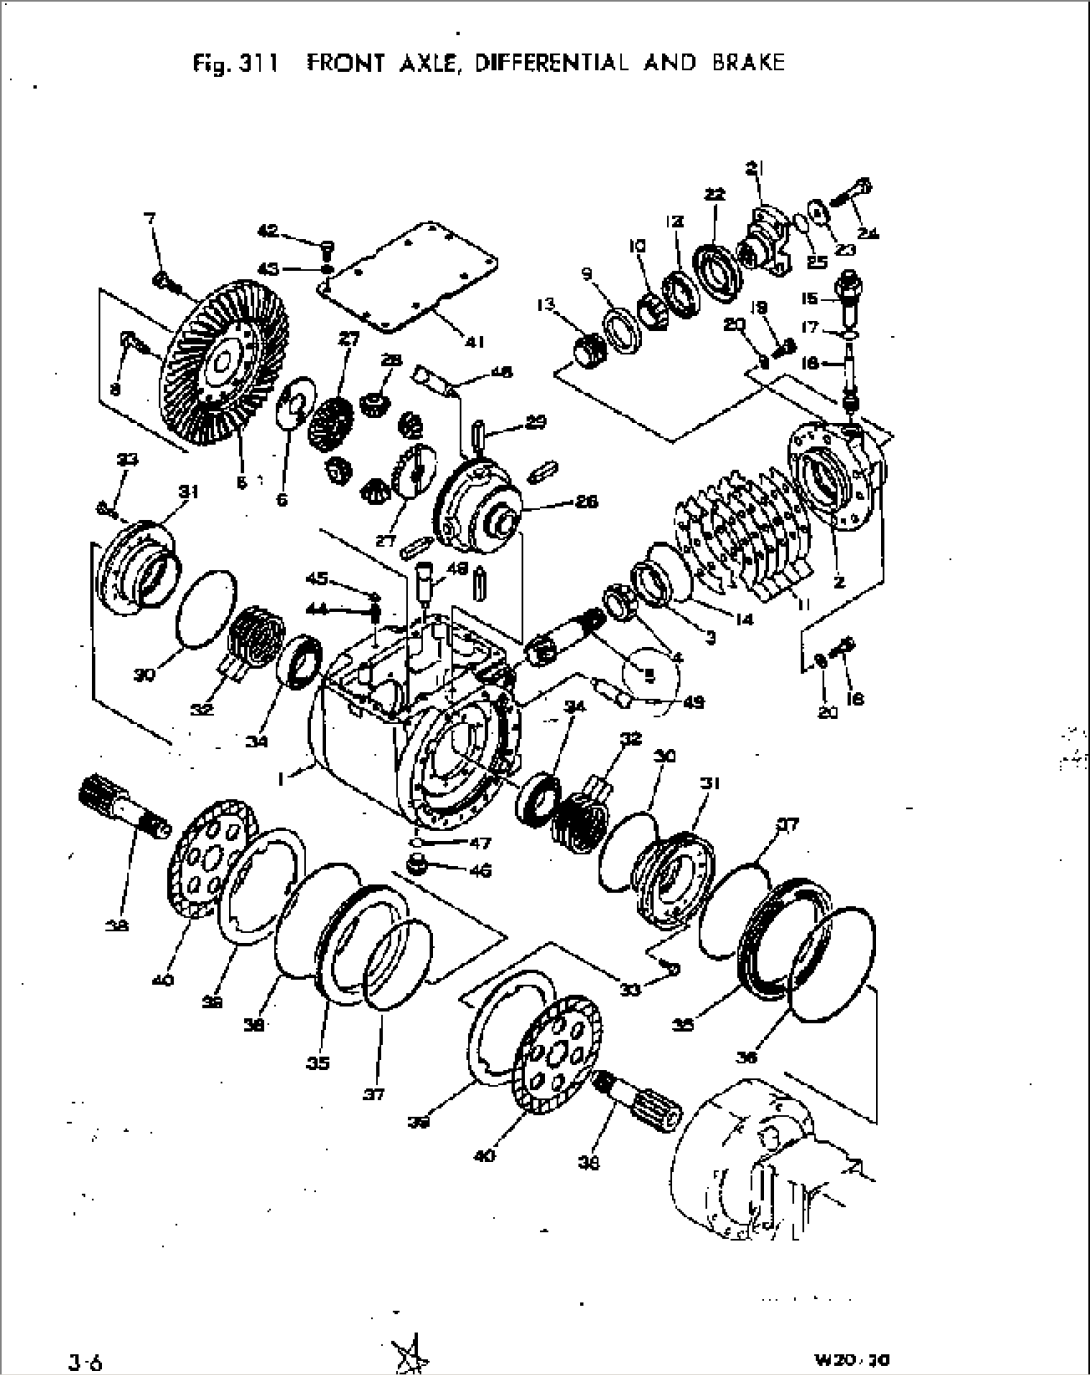 FRONT AXLE¤ DIFFERENTIAL AND BRAKE